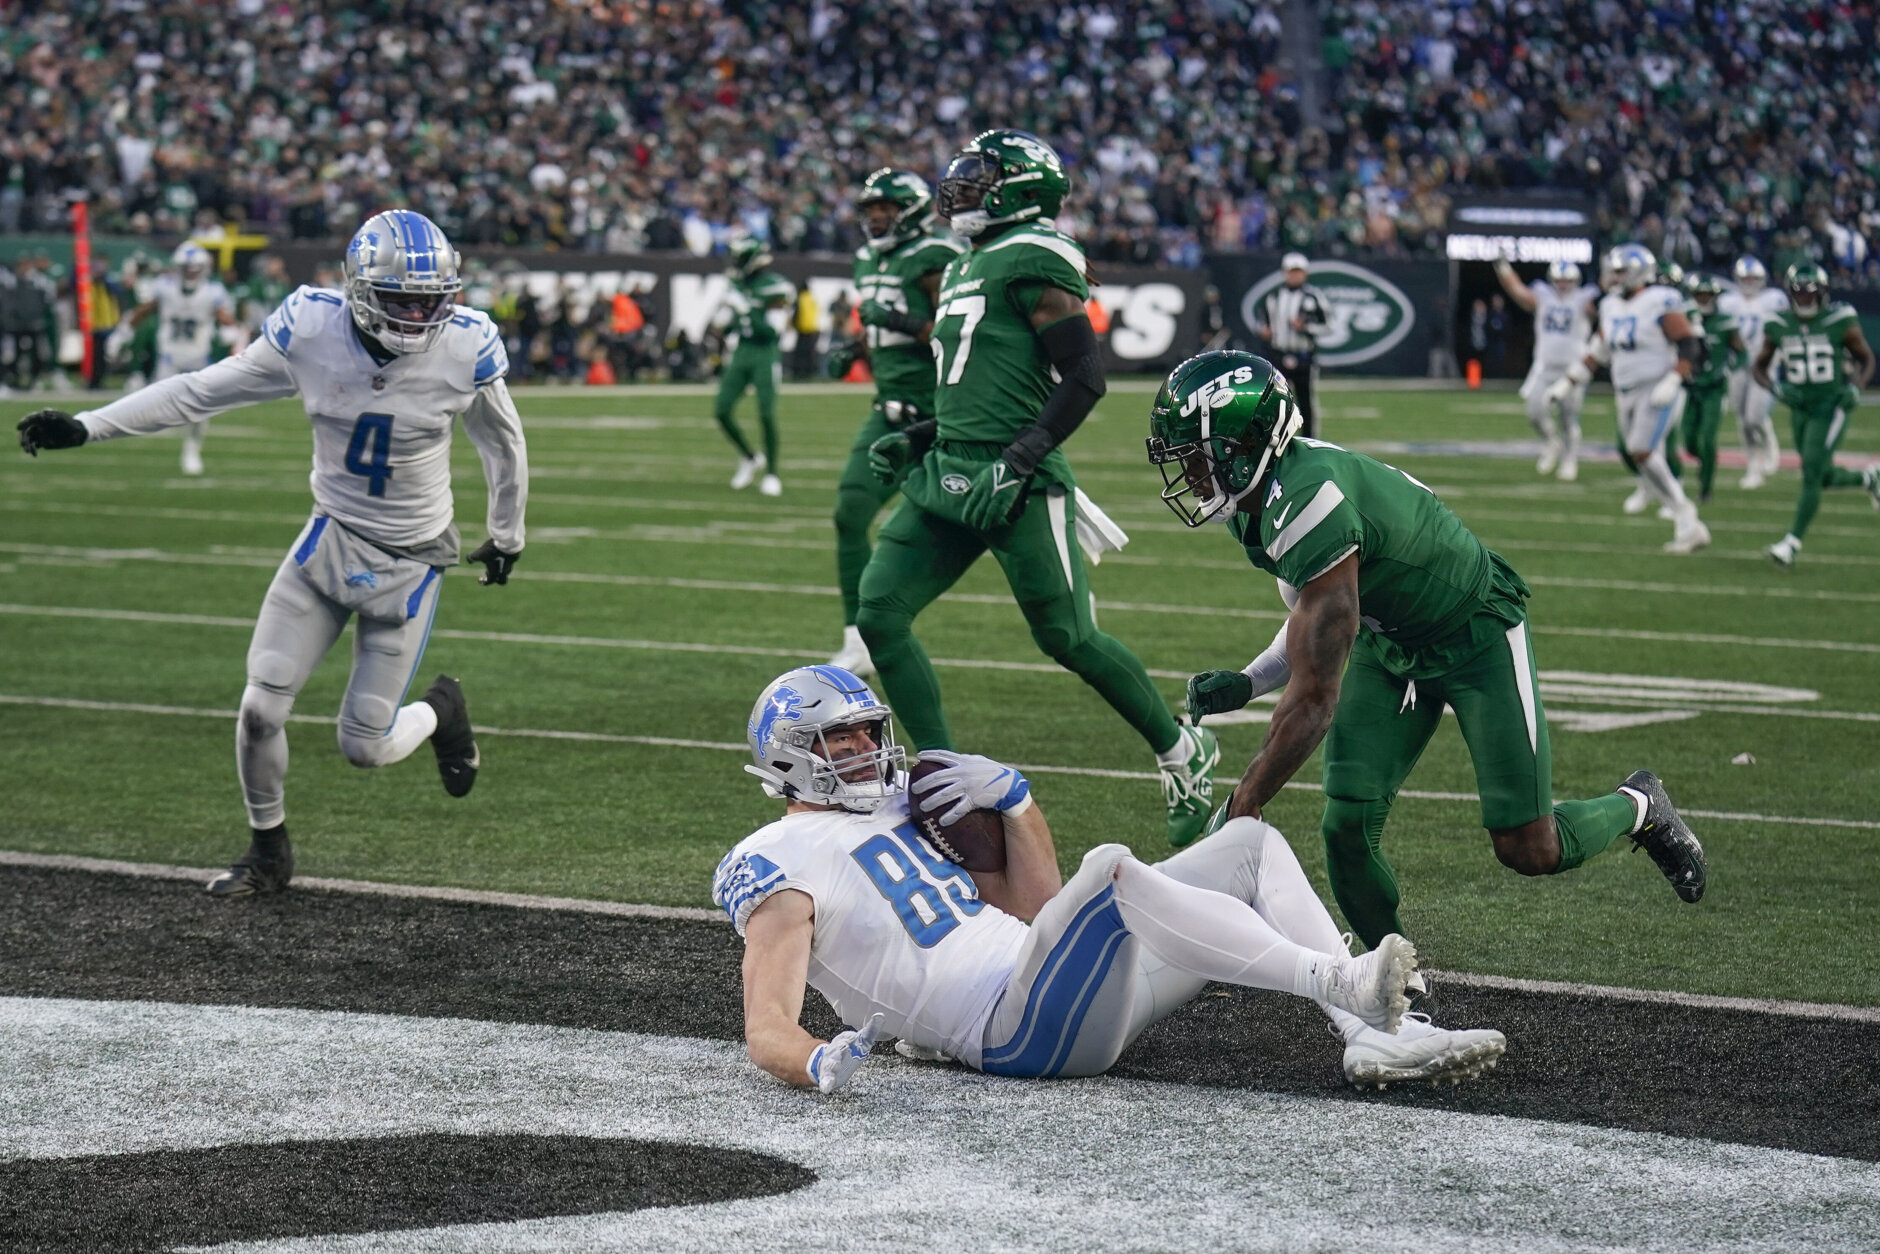 <p><em><strong>Lions 20</strong></em><br />
<em><strong>Jets 17</strong></em></p>
<p>Of the teams chasing a wild card berth, none seem as likely to come grab one as Detroit. Not just because they hold a tiebreaker advantage over the Commanders but because they&#8217;re on a roll (winners of six of their last seven games) and have a relatively easy remaining schedule (at Carolina, vs. Bears, at Green Bay).</p>
